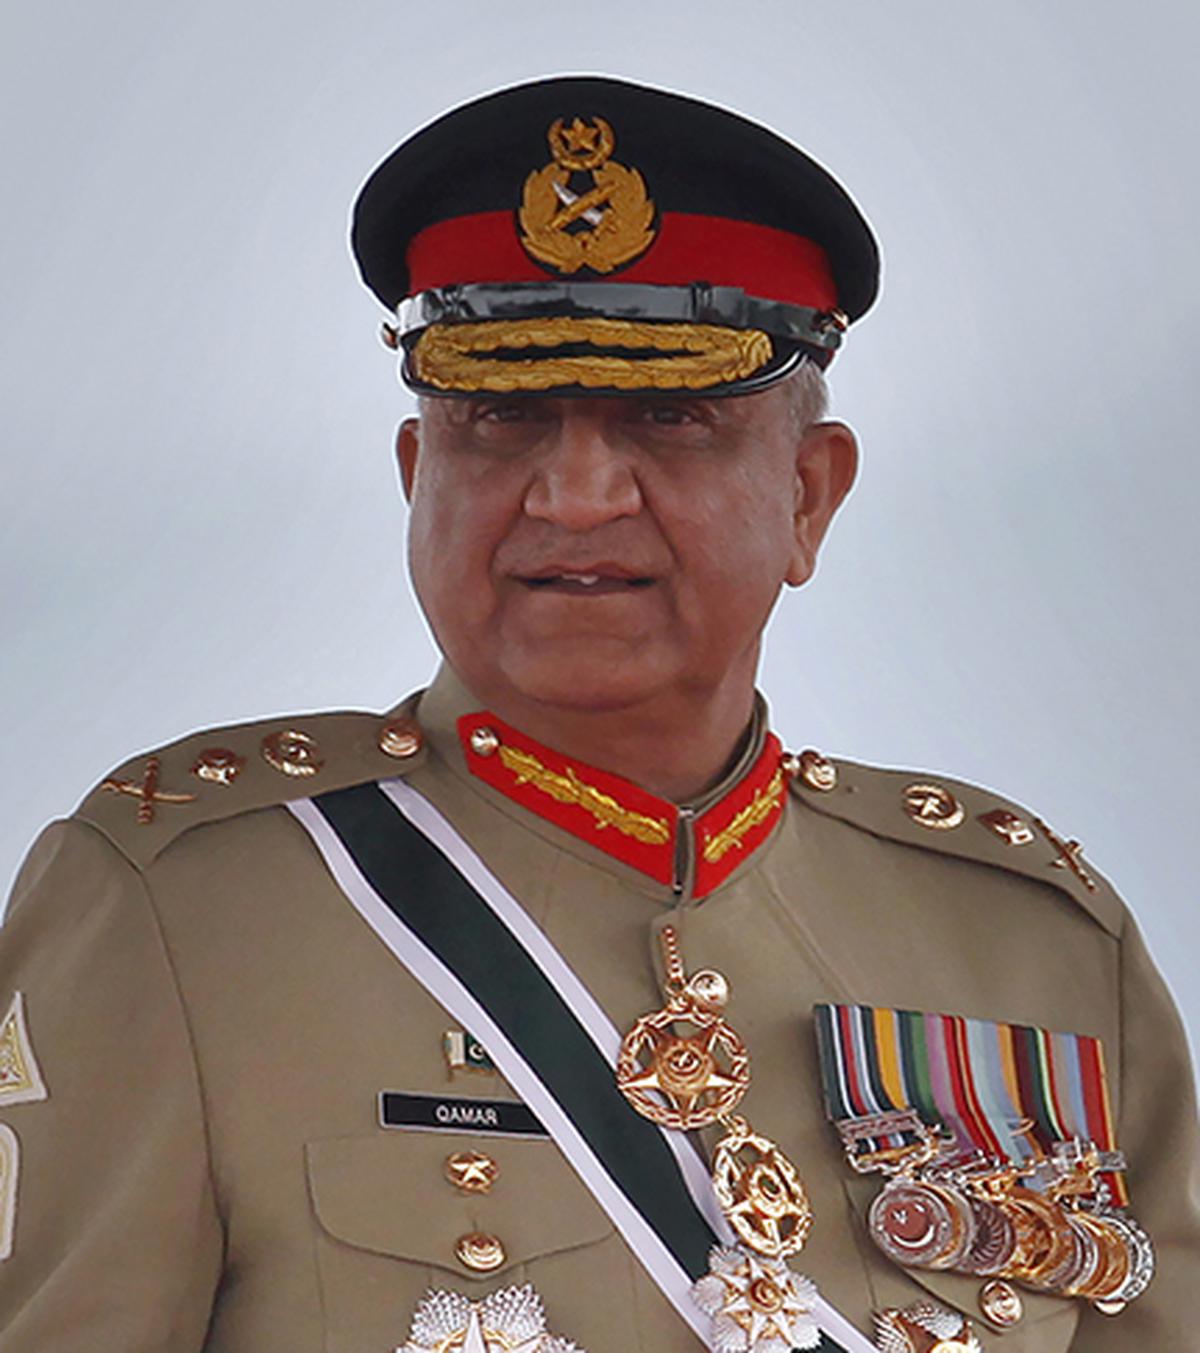 Pakistan Army’s decision to remain apolitical will shield it from ‘vagaries of politics’, says Gen Bajwa